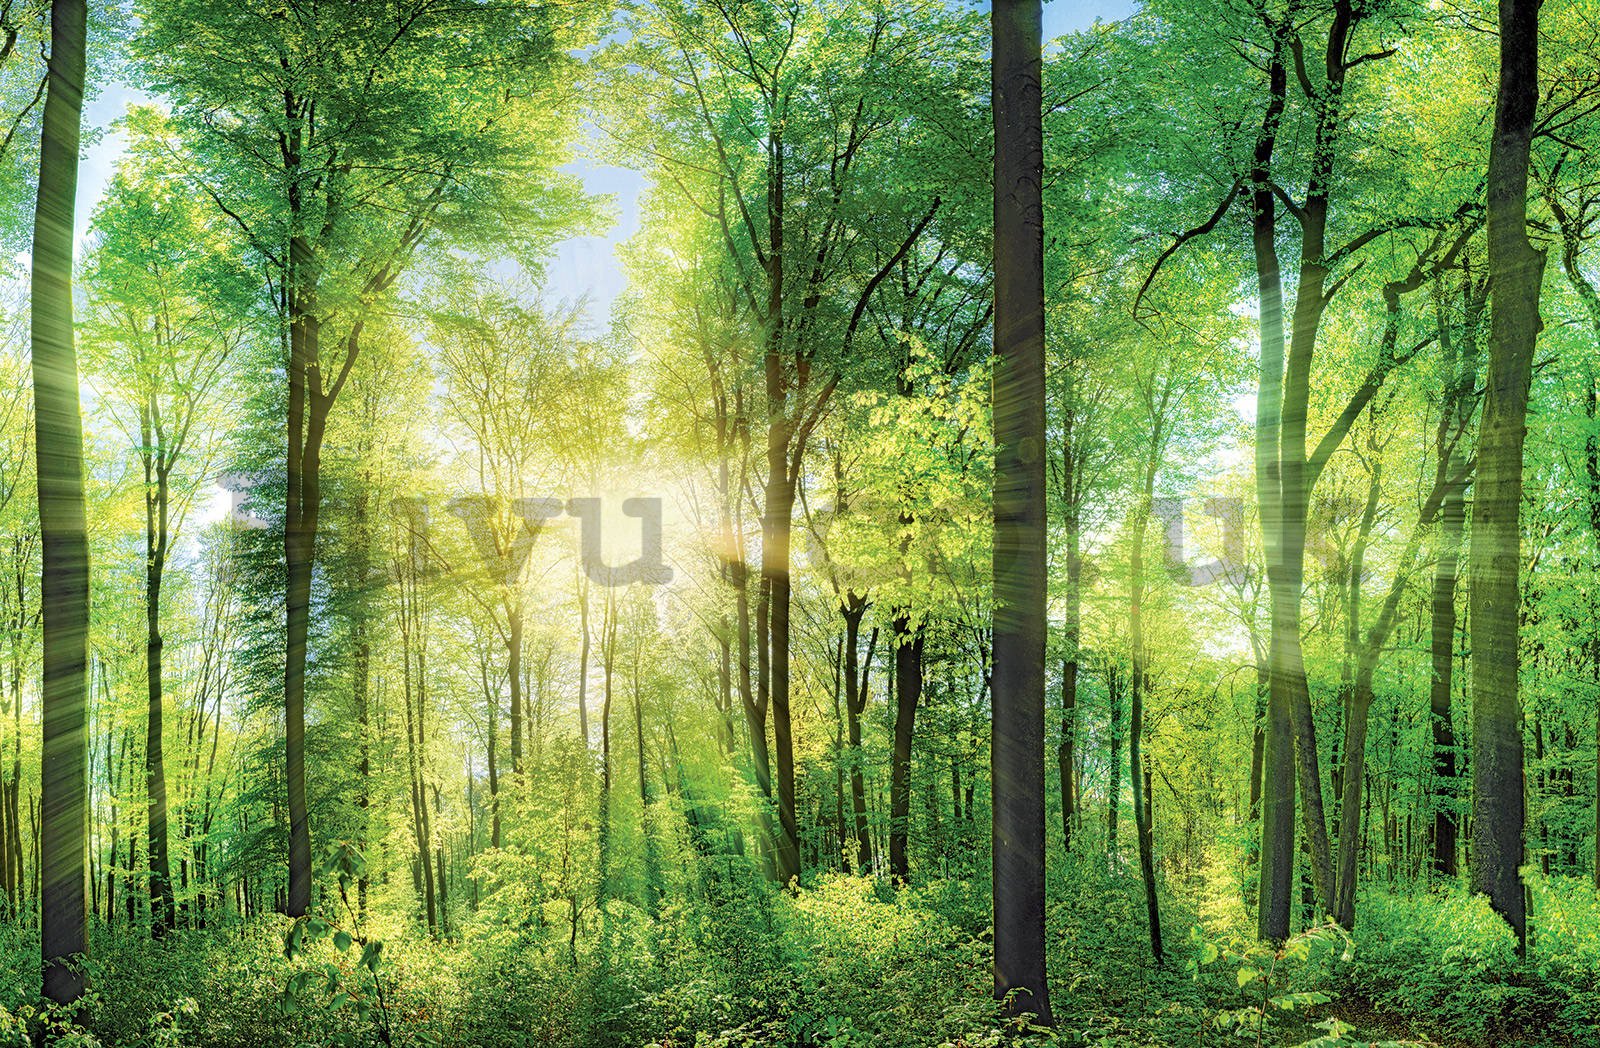 Painting on canvas: Green Forest (3) - 116x76 cm